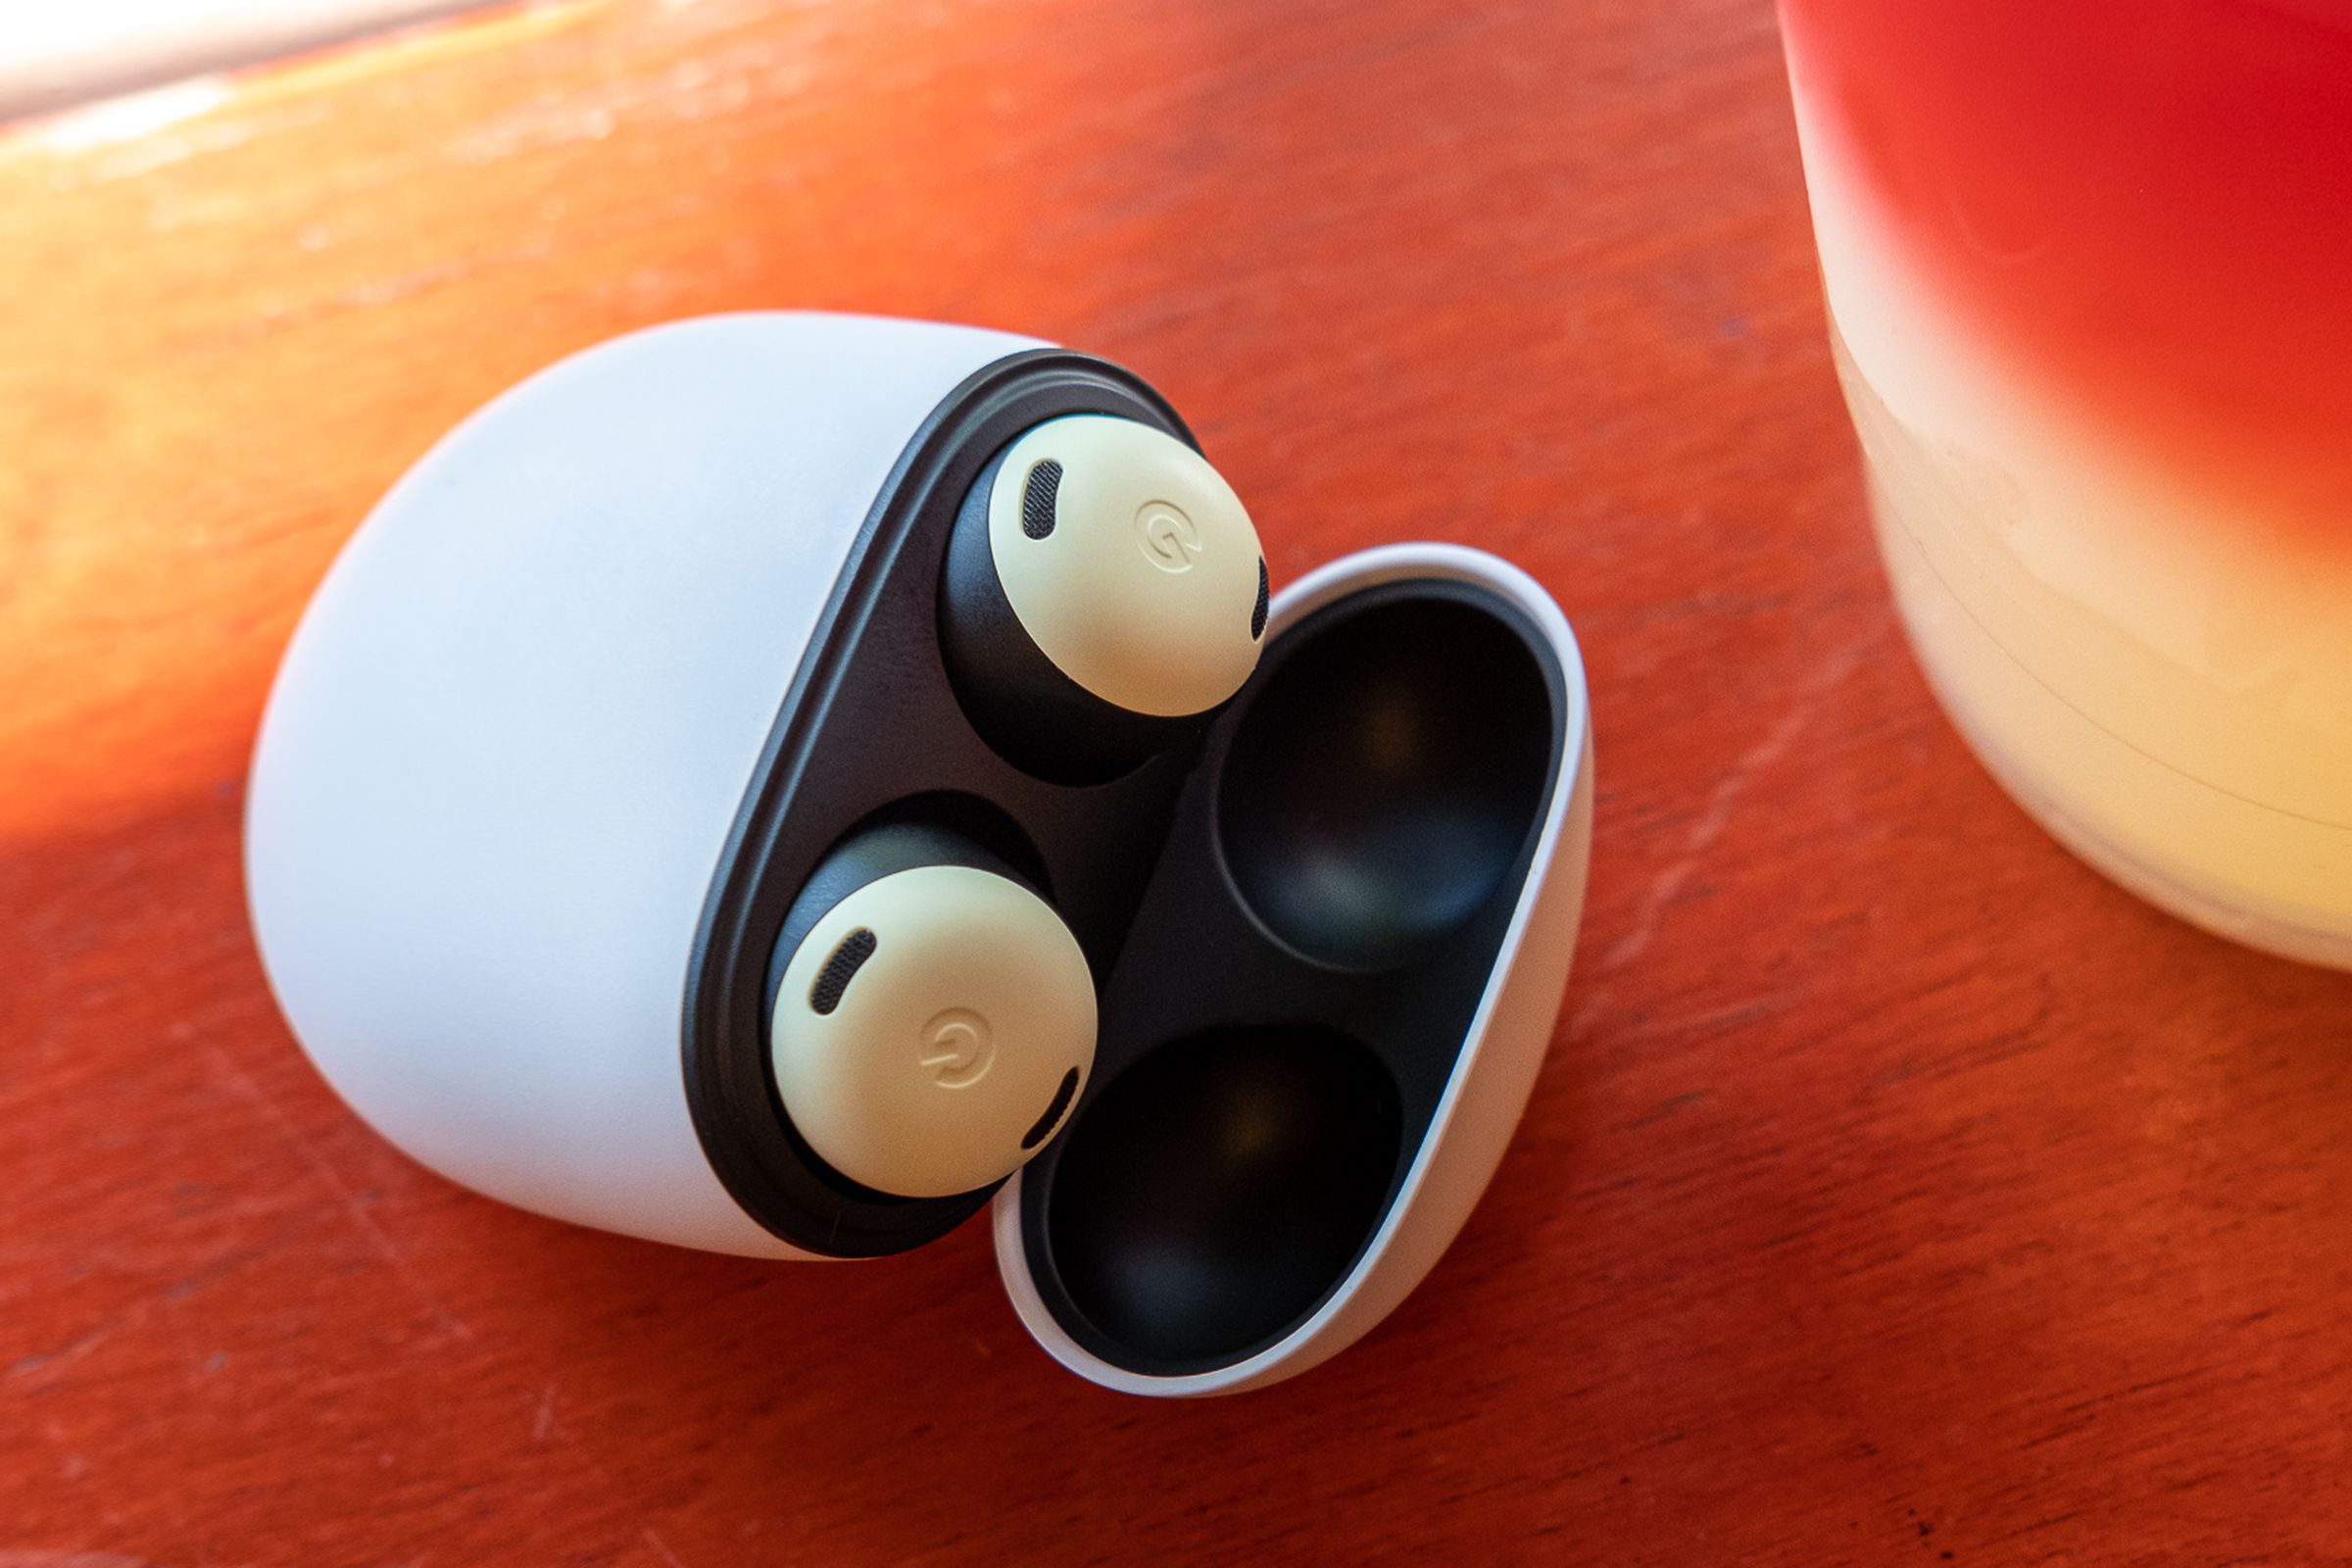 The yellow Pixel Buds Pro wireless earbuds sitting in their charging case with the lid open, resting on an orange table beside a plastic cup of colorful lemonade.